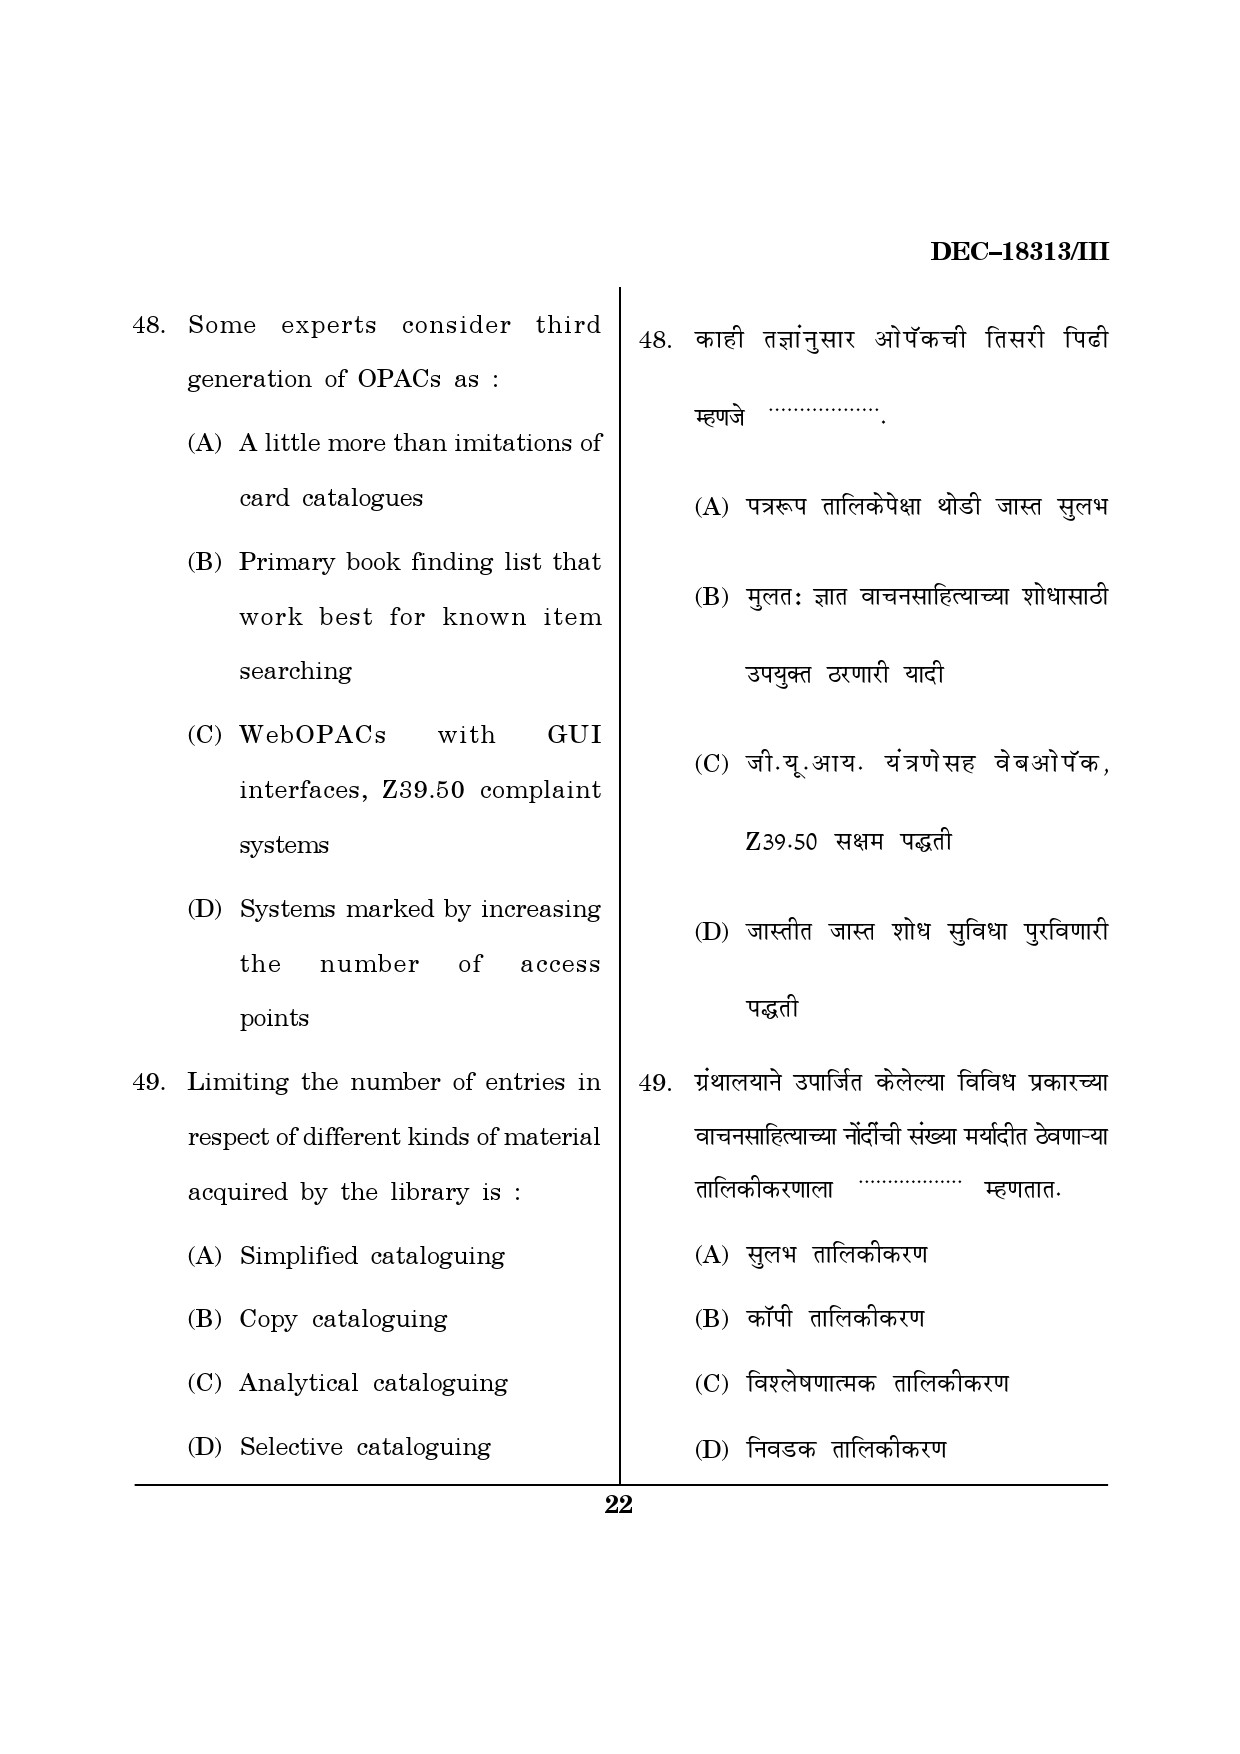 Maharashtra SET Library Information Science Question Paper III December 2013 21